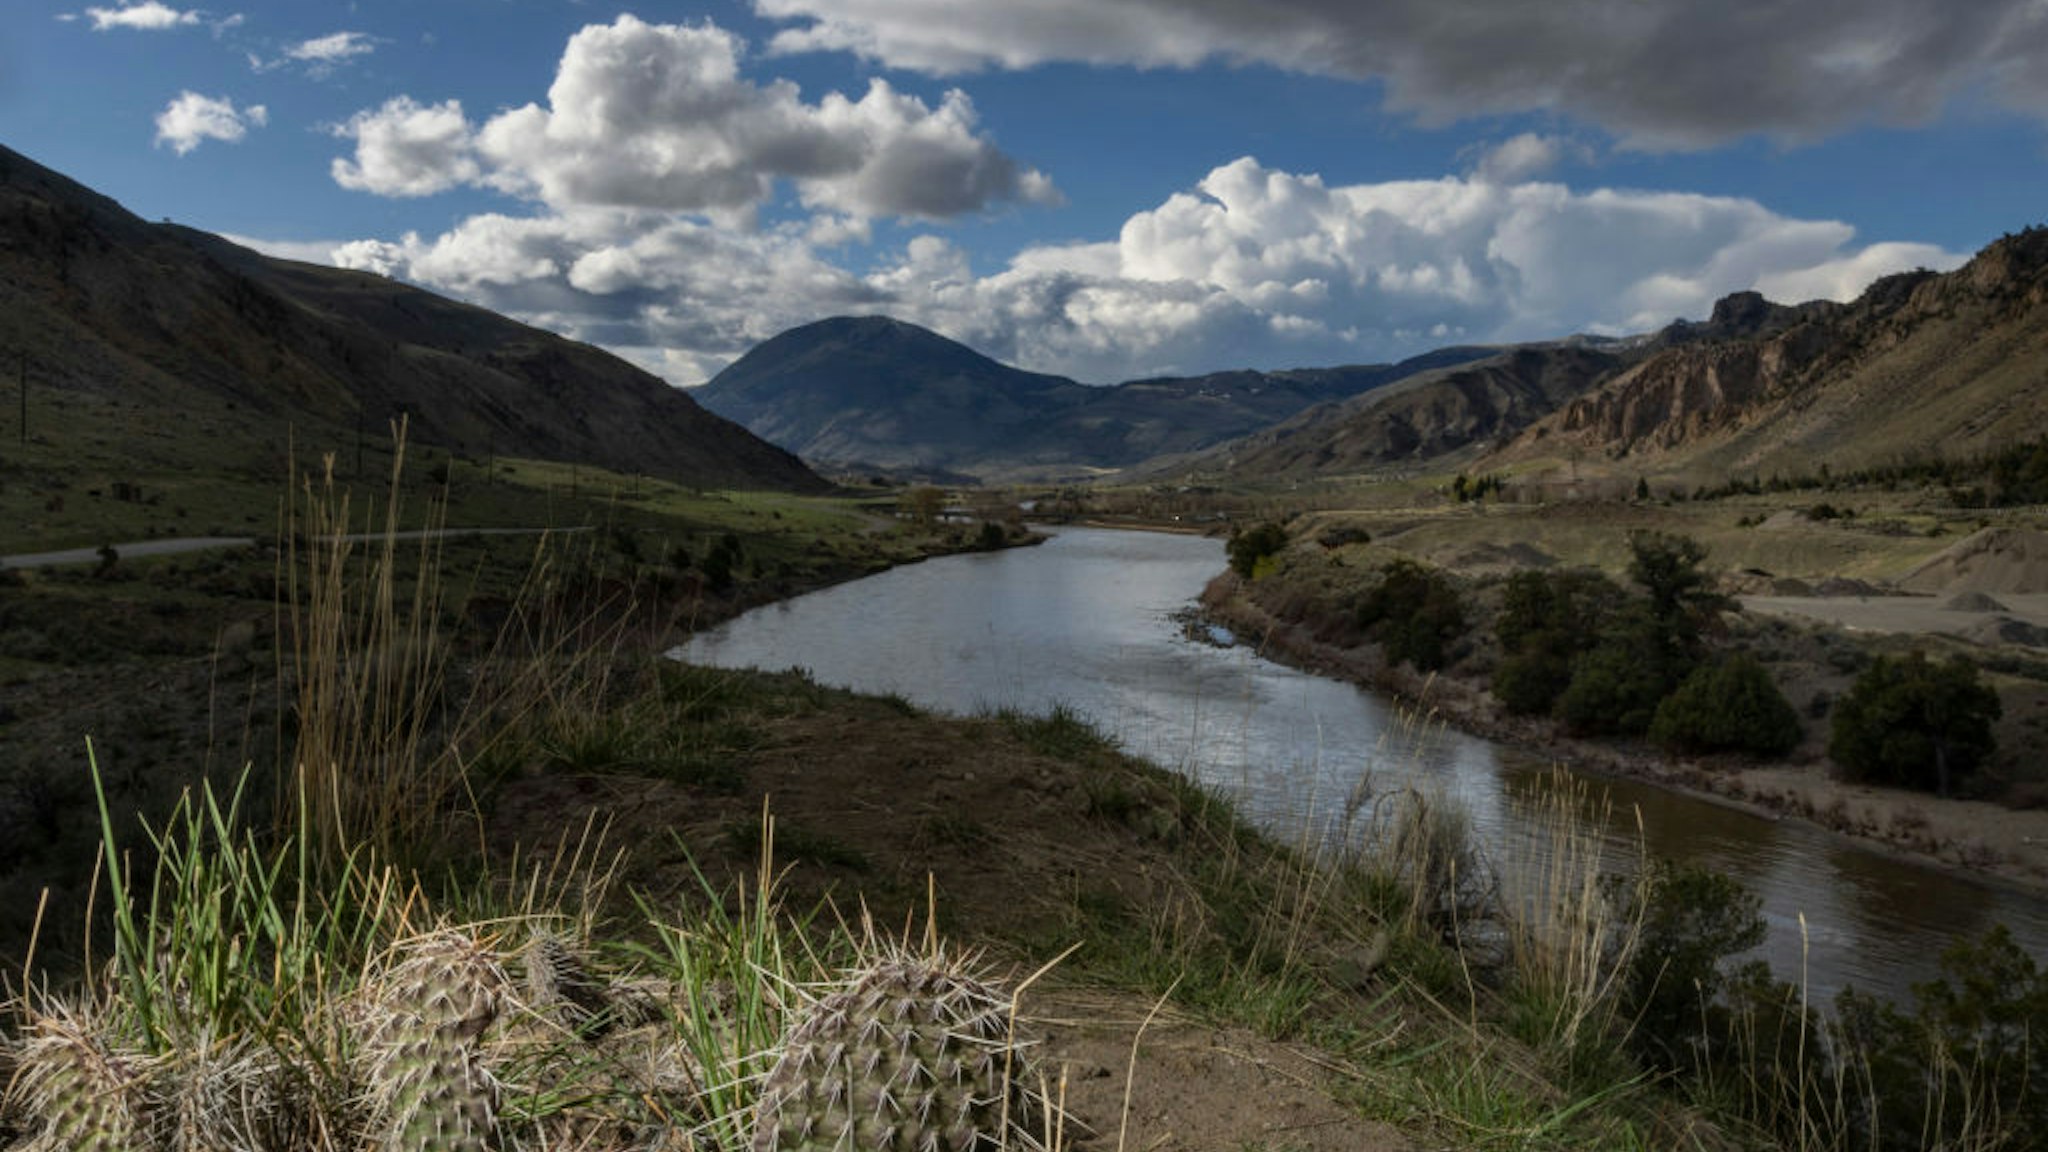 GARDINER, MT - MAY 6, 2023 - The Yellowstone River flows though the Paradise Valley north of Gardiner, Montana May 6, 2023. Mining activity in the area could potentially contaminate the river.